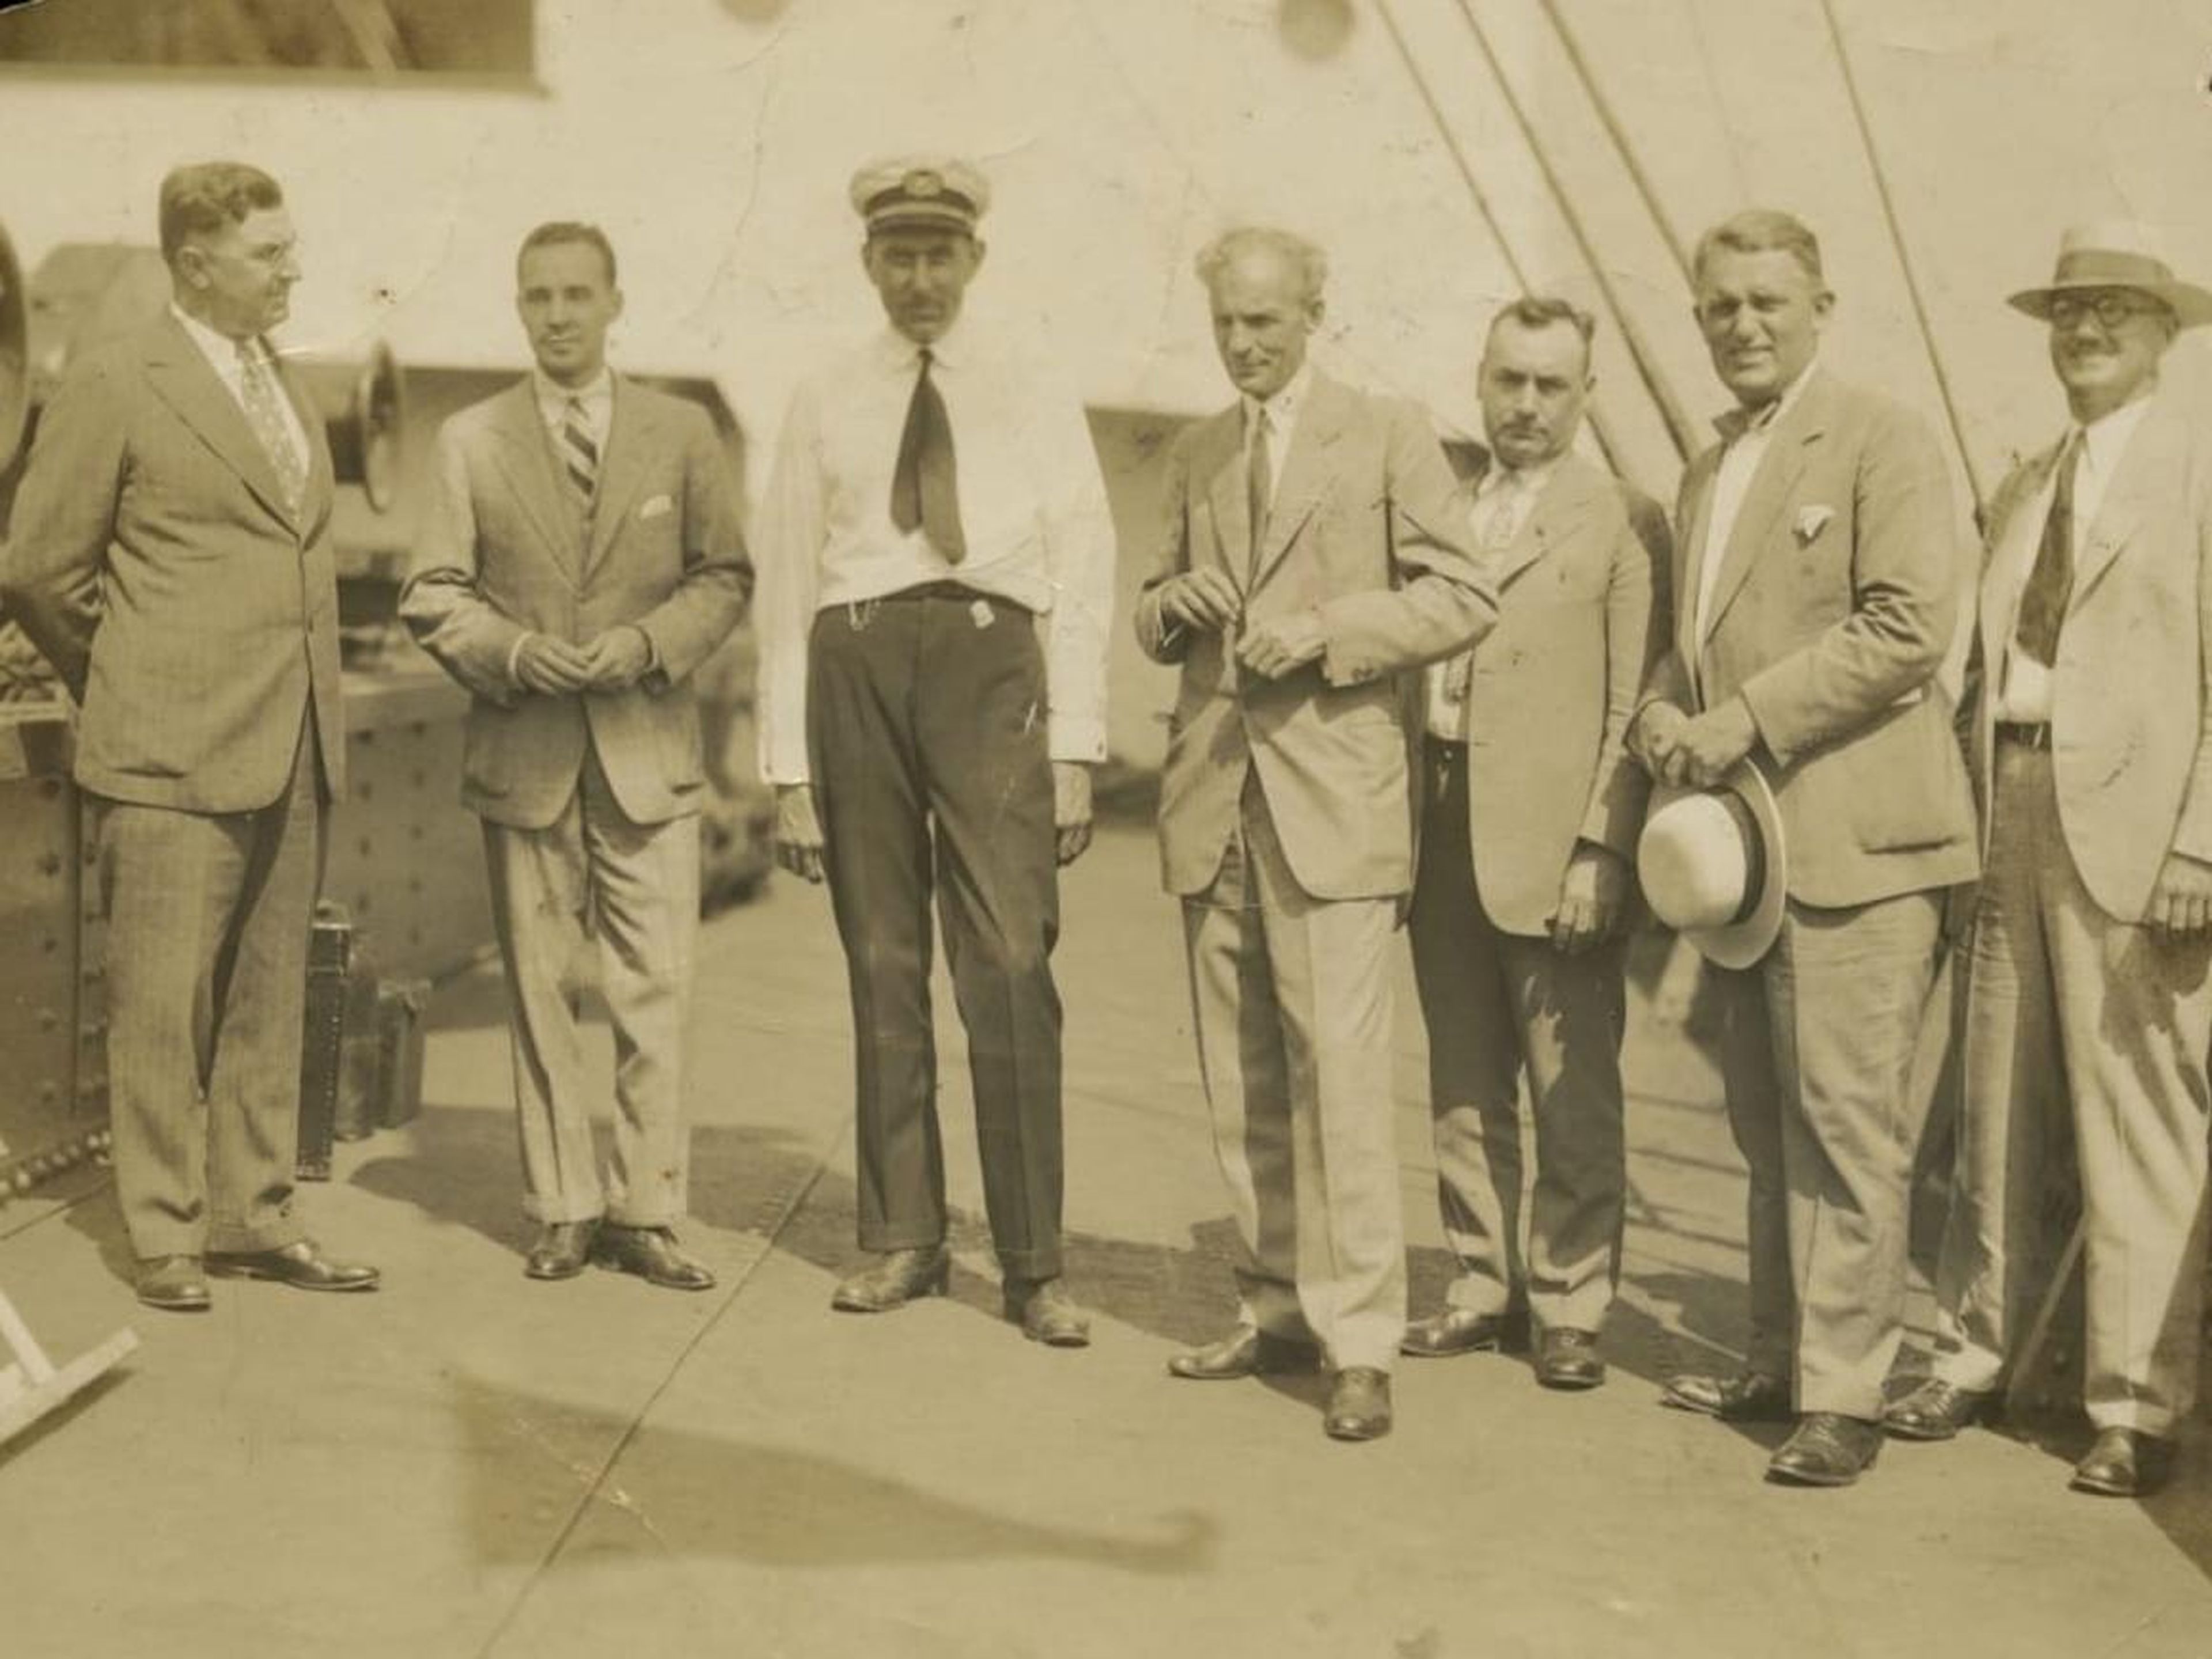 Ford and others on the MS Lake Ormac in Michigan in 1928, shortly before the project in Brazil began.